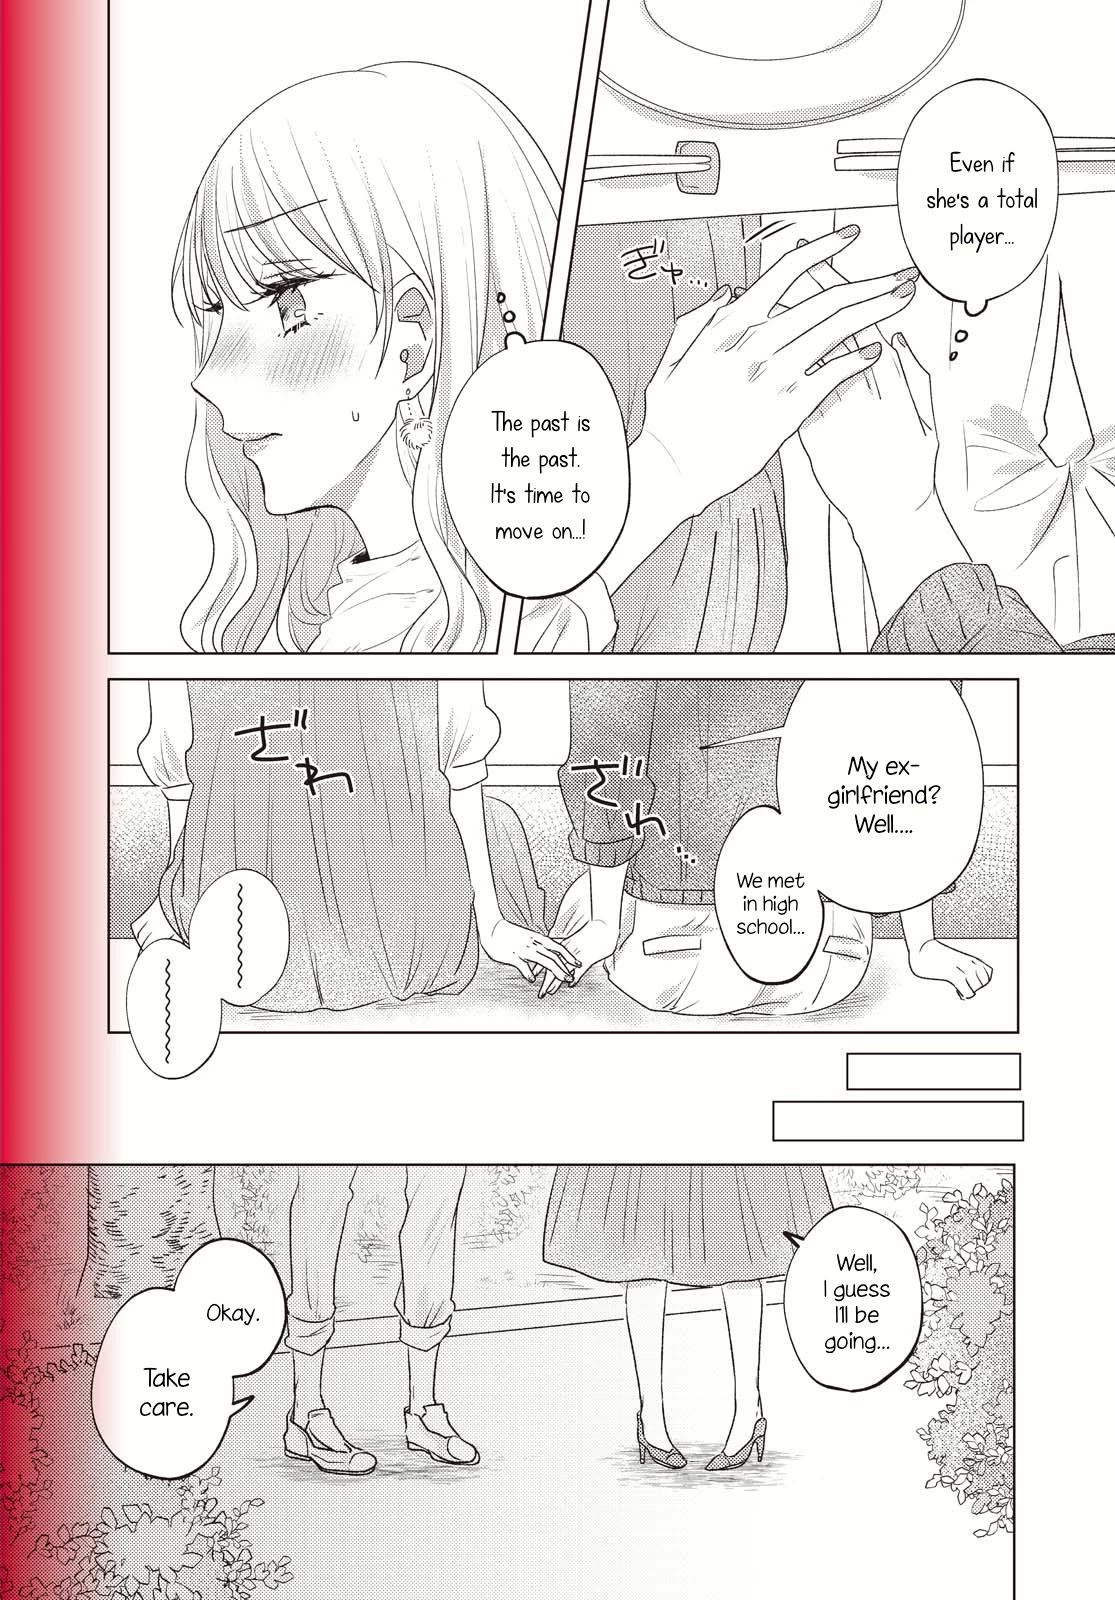 Today, We Continue Our Lives Together Under The Same Roof - Page 2